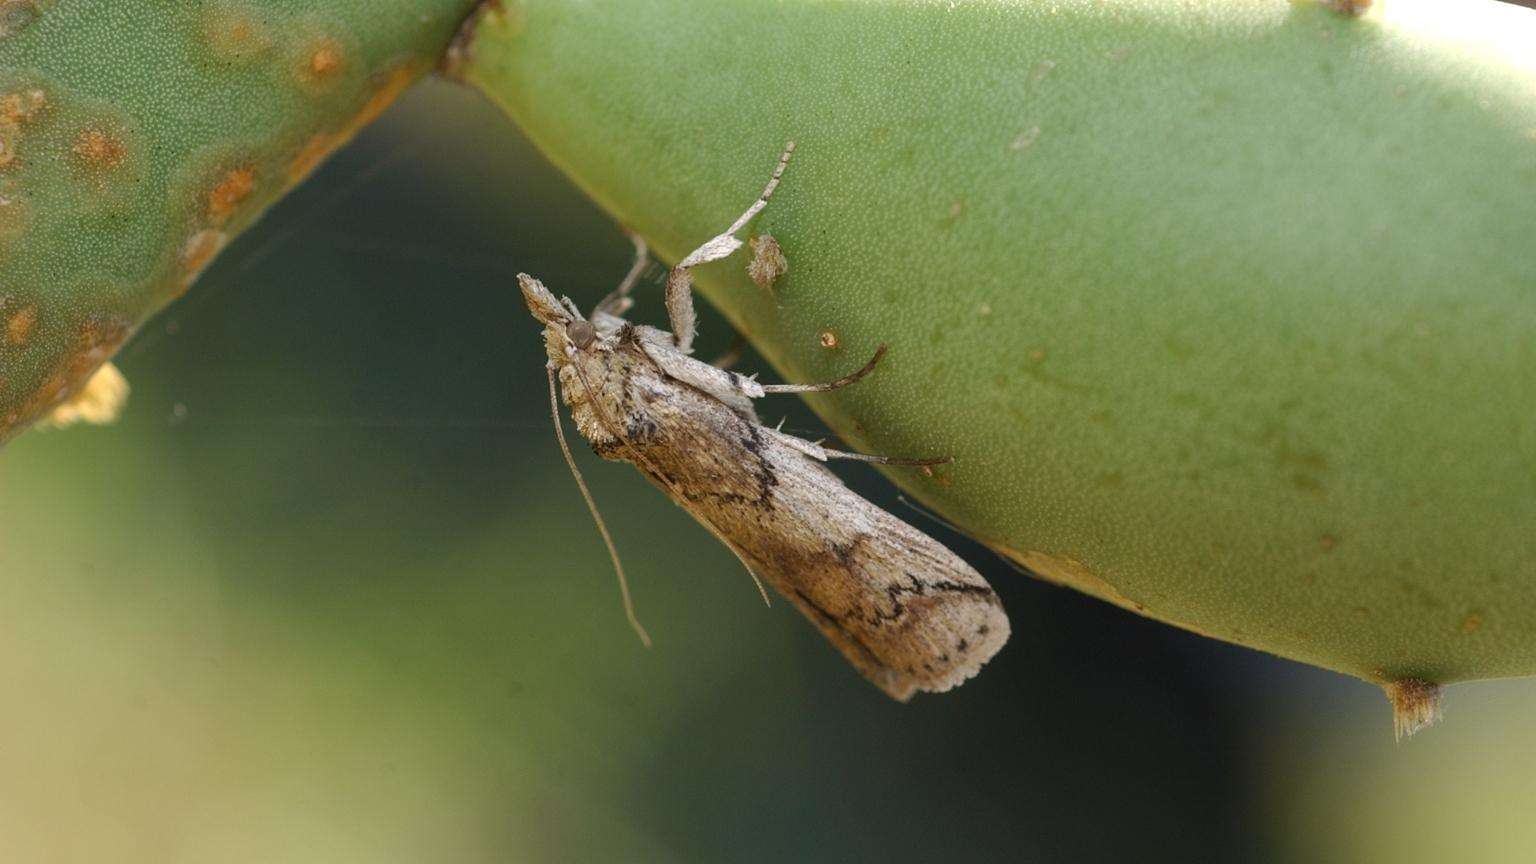 Grayish-brown moth with black lines on its wings on a cactus flower bud.